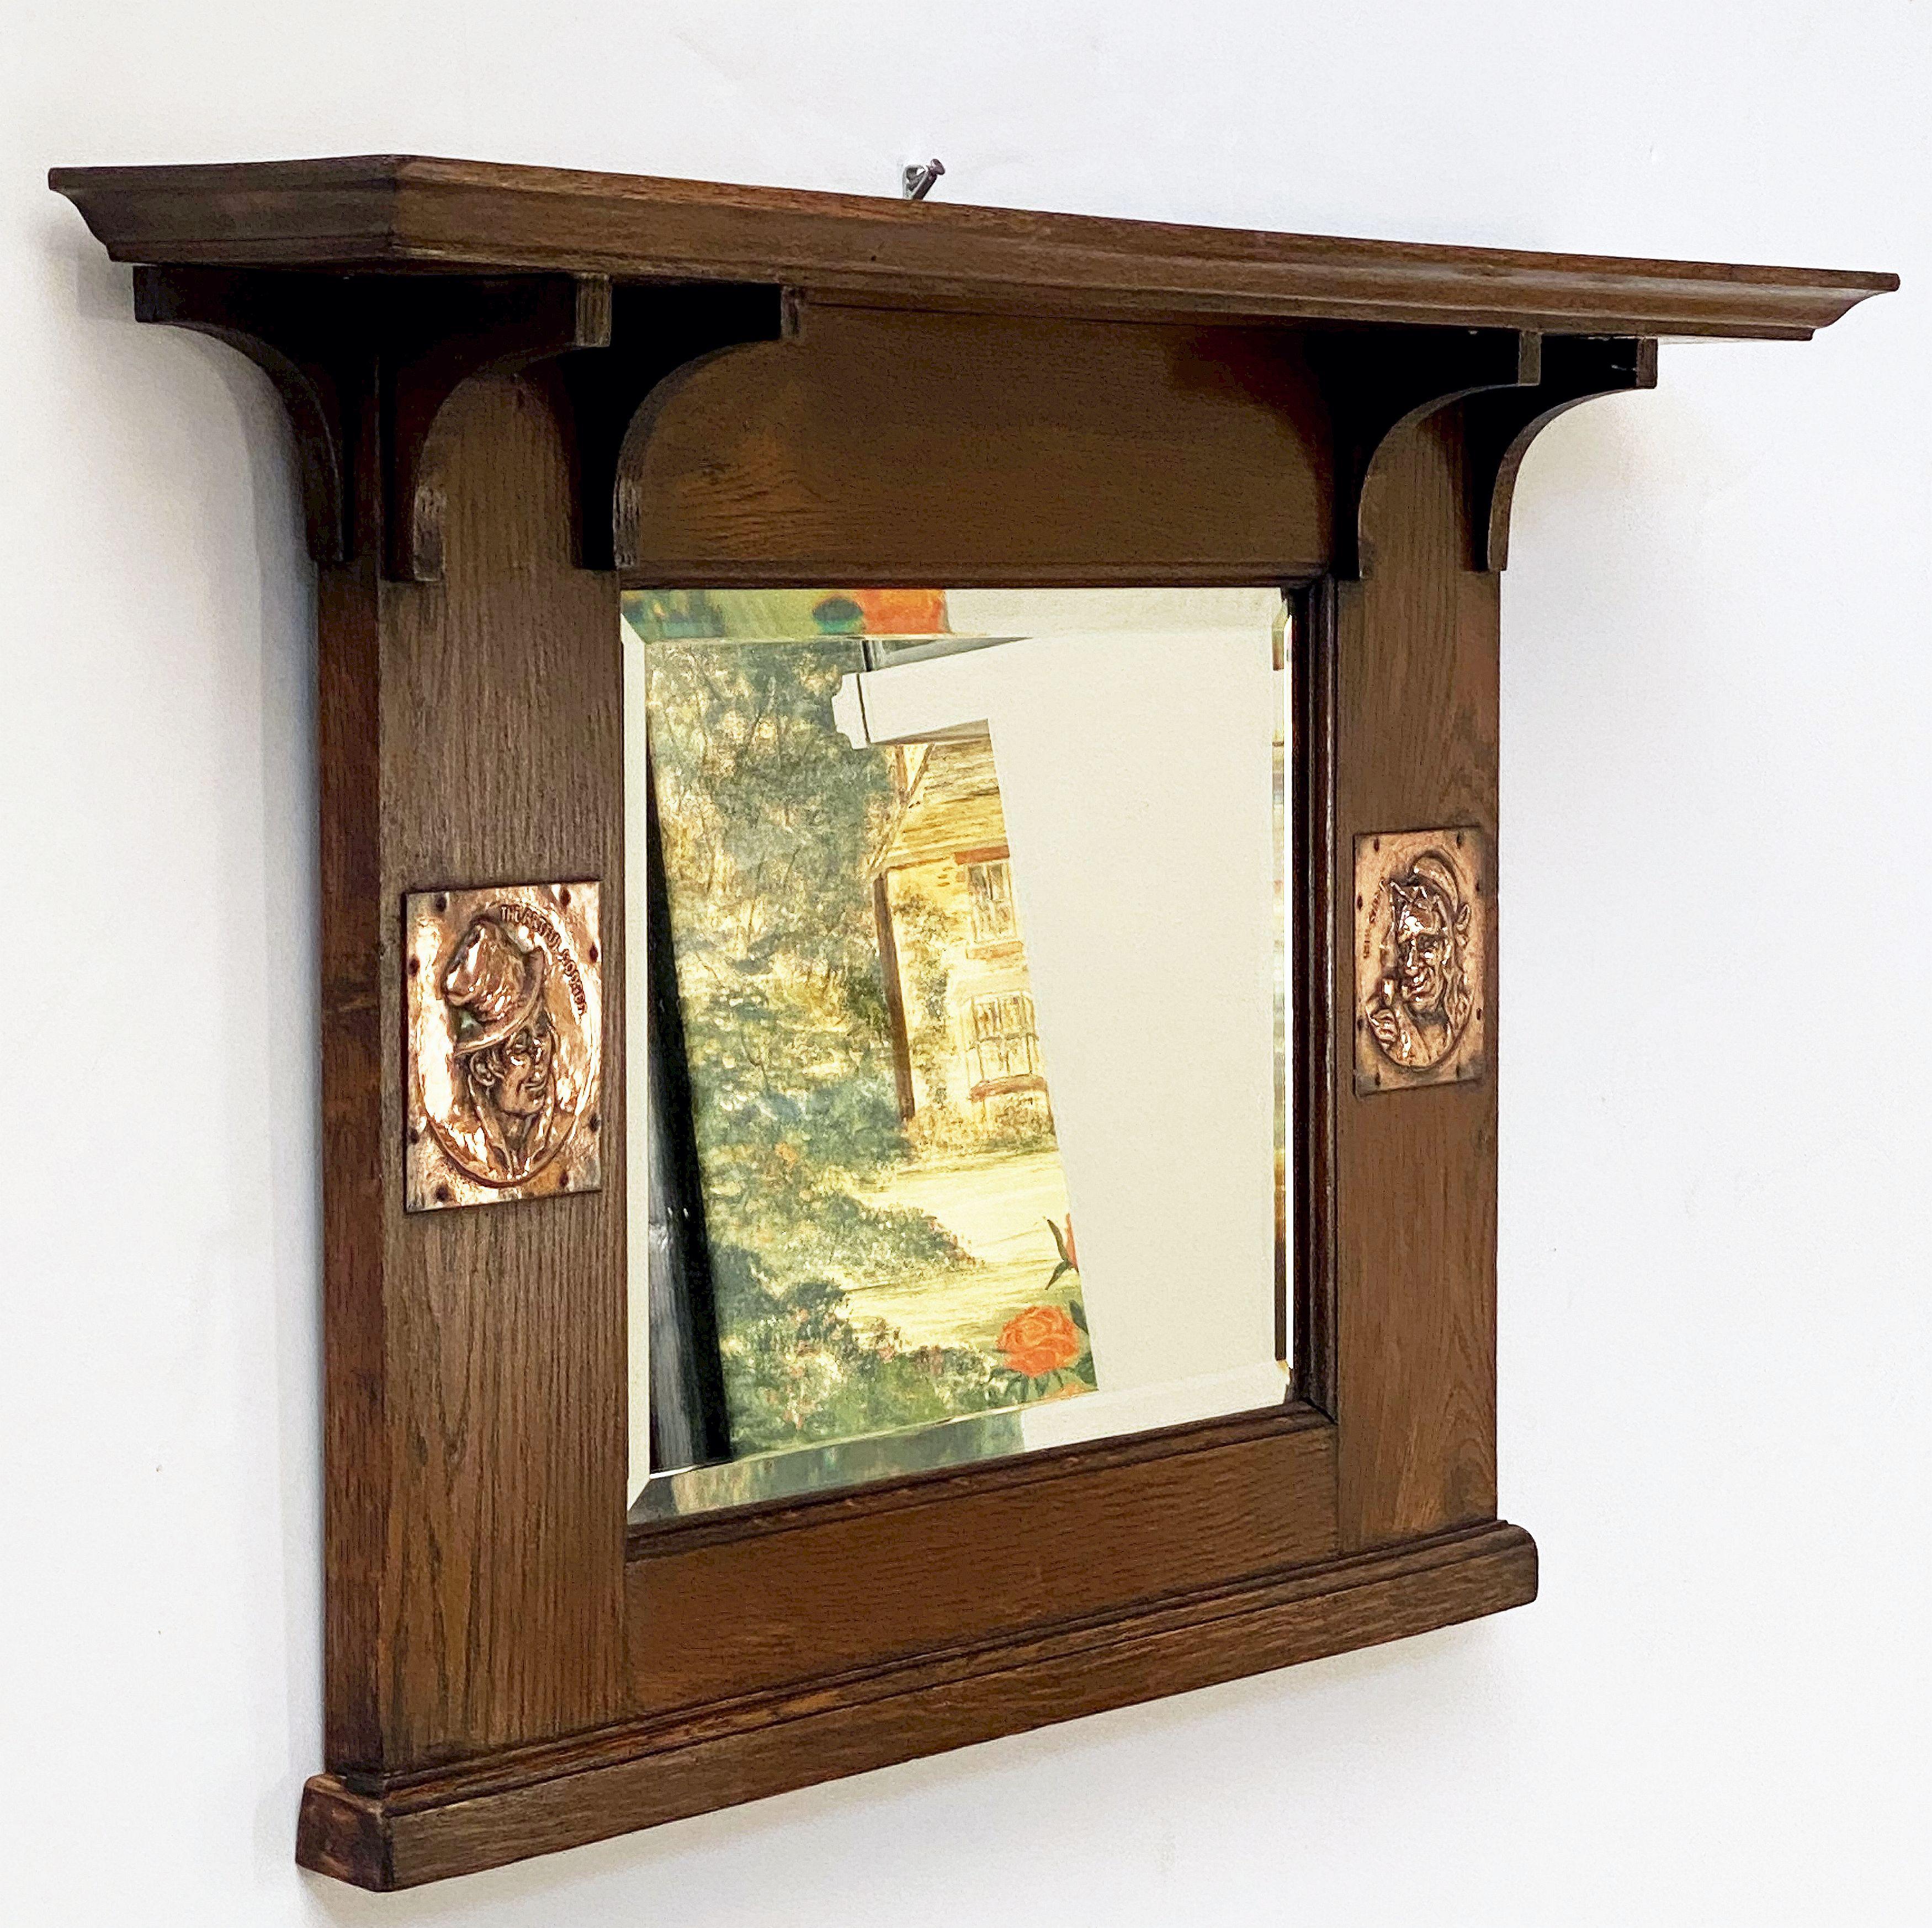 A fine English rectangular overmantle wall mirror of oak from the Arts and Crafts Era, featuring a crown moulding top over a beveled glass mirror with opposing decorative relief cartouches depicting The Artful Dodger and Mrs. Gamp - spurious